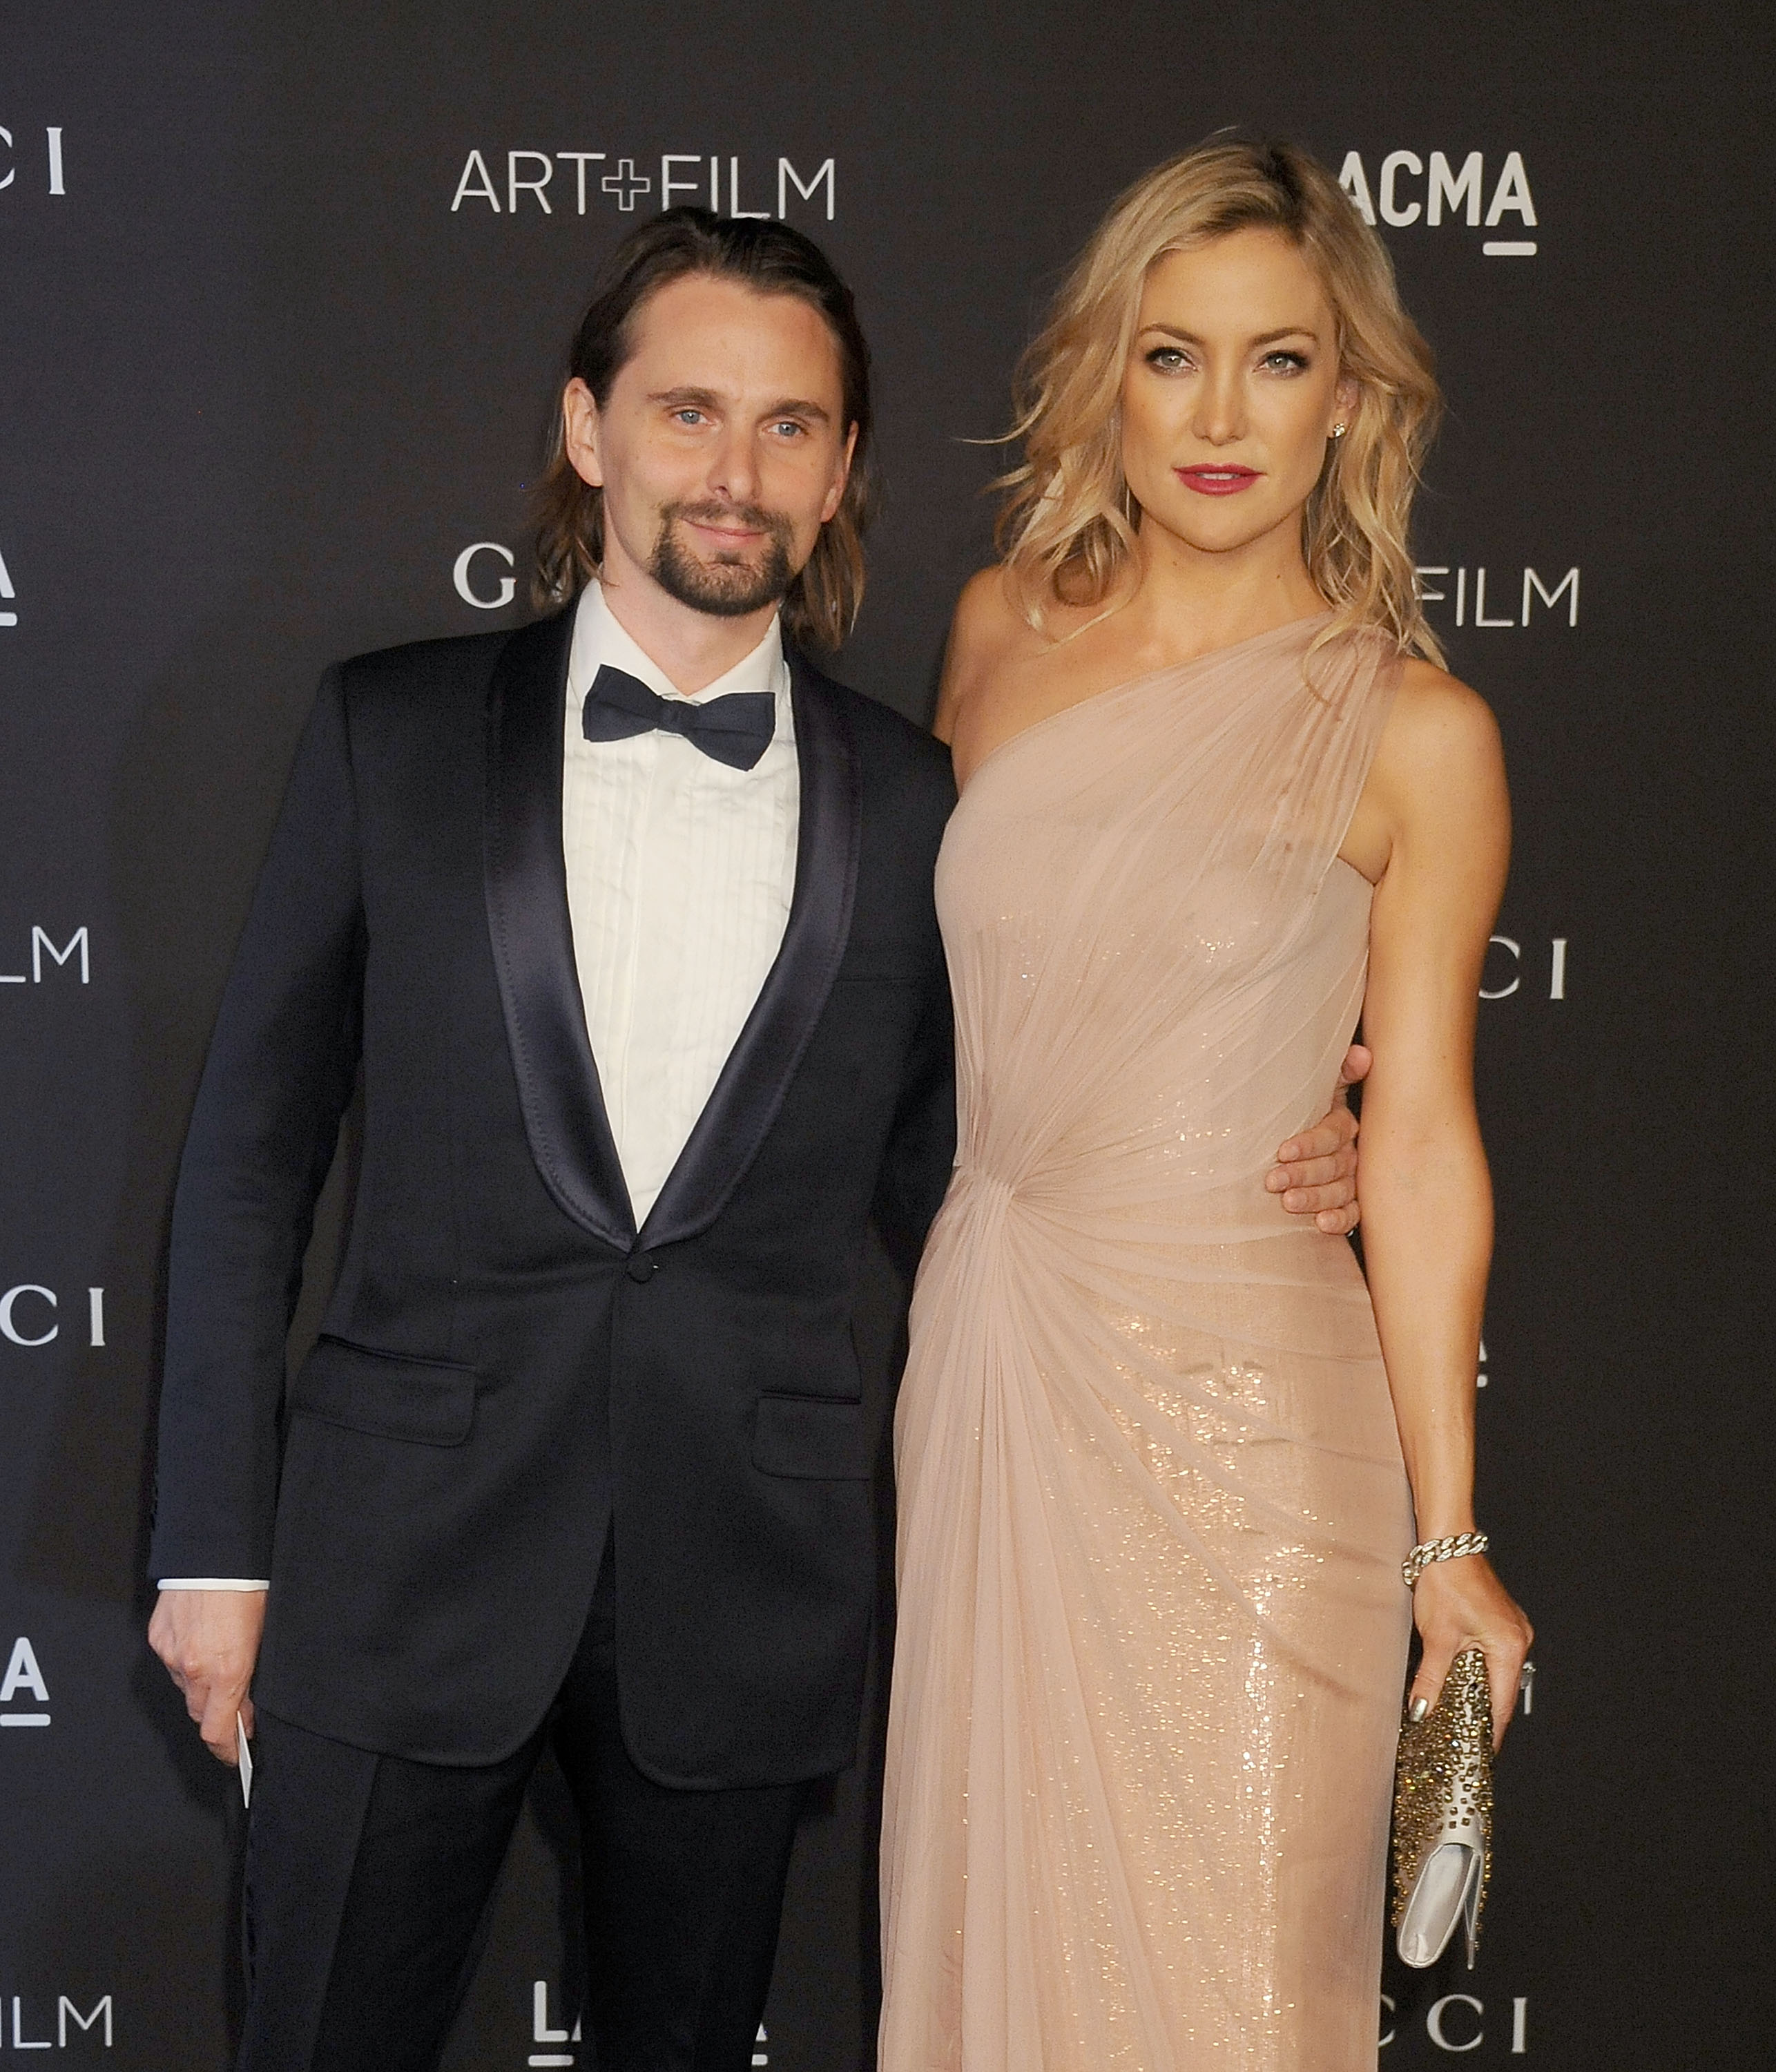 Kate Hudson and musician Matthew Bellamy pose on the red carpet together at the LACMA Art + Film Gala